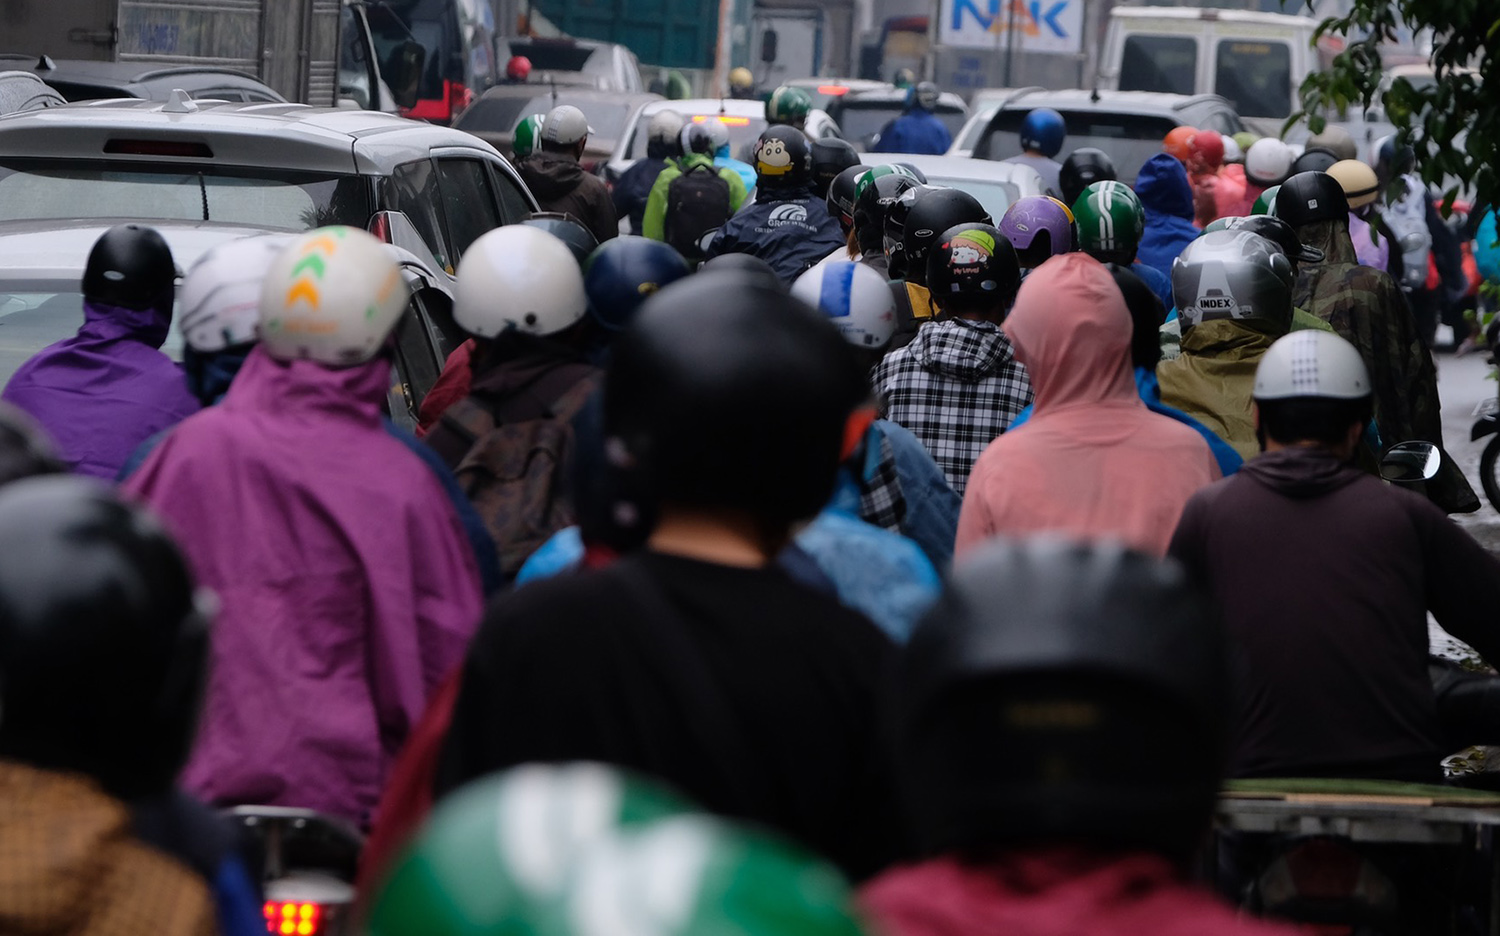 The line of cars followed each other back to their hometown for the holidays of April 30 and May 1, the streets of Hanoi and Ho Chi Minh City were congested - April 14